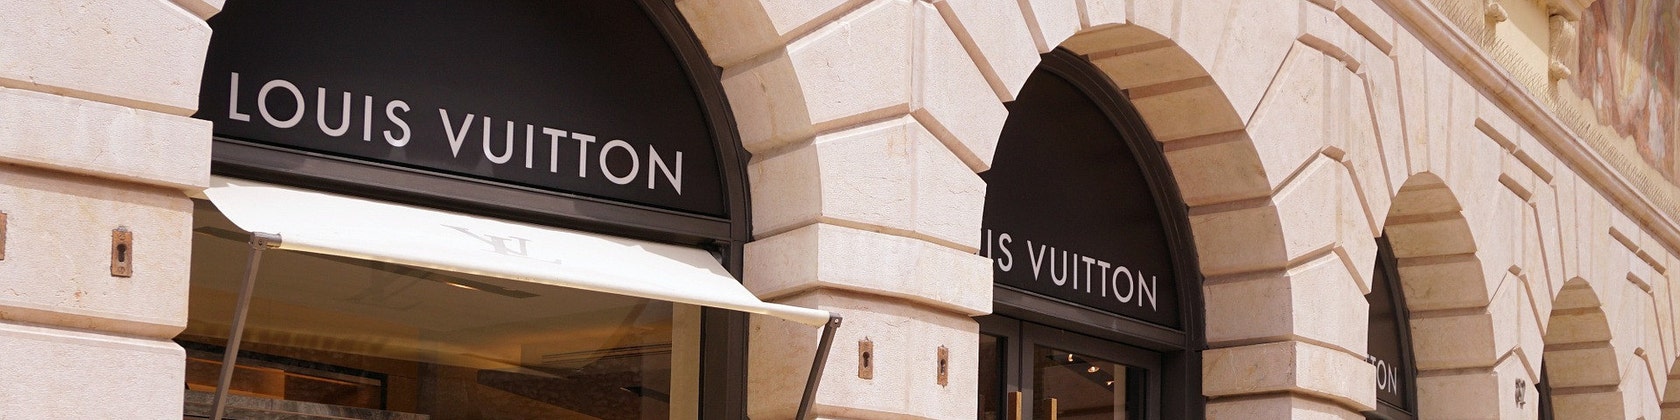 Louis Vuitton Tampa Bay store, United States